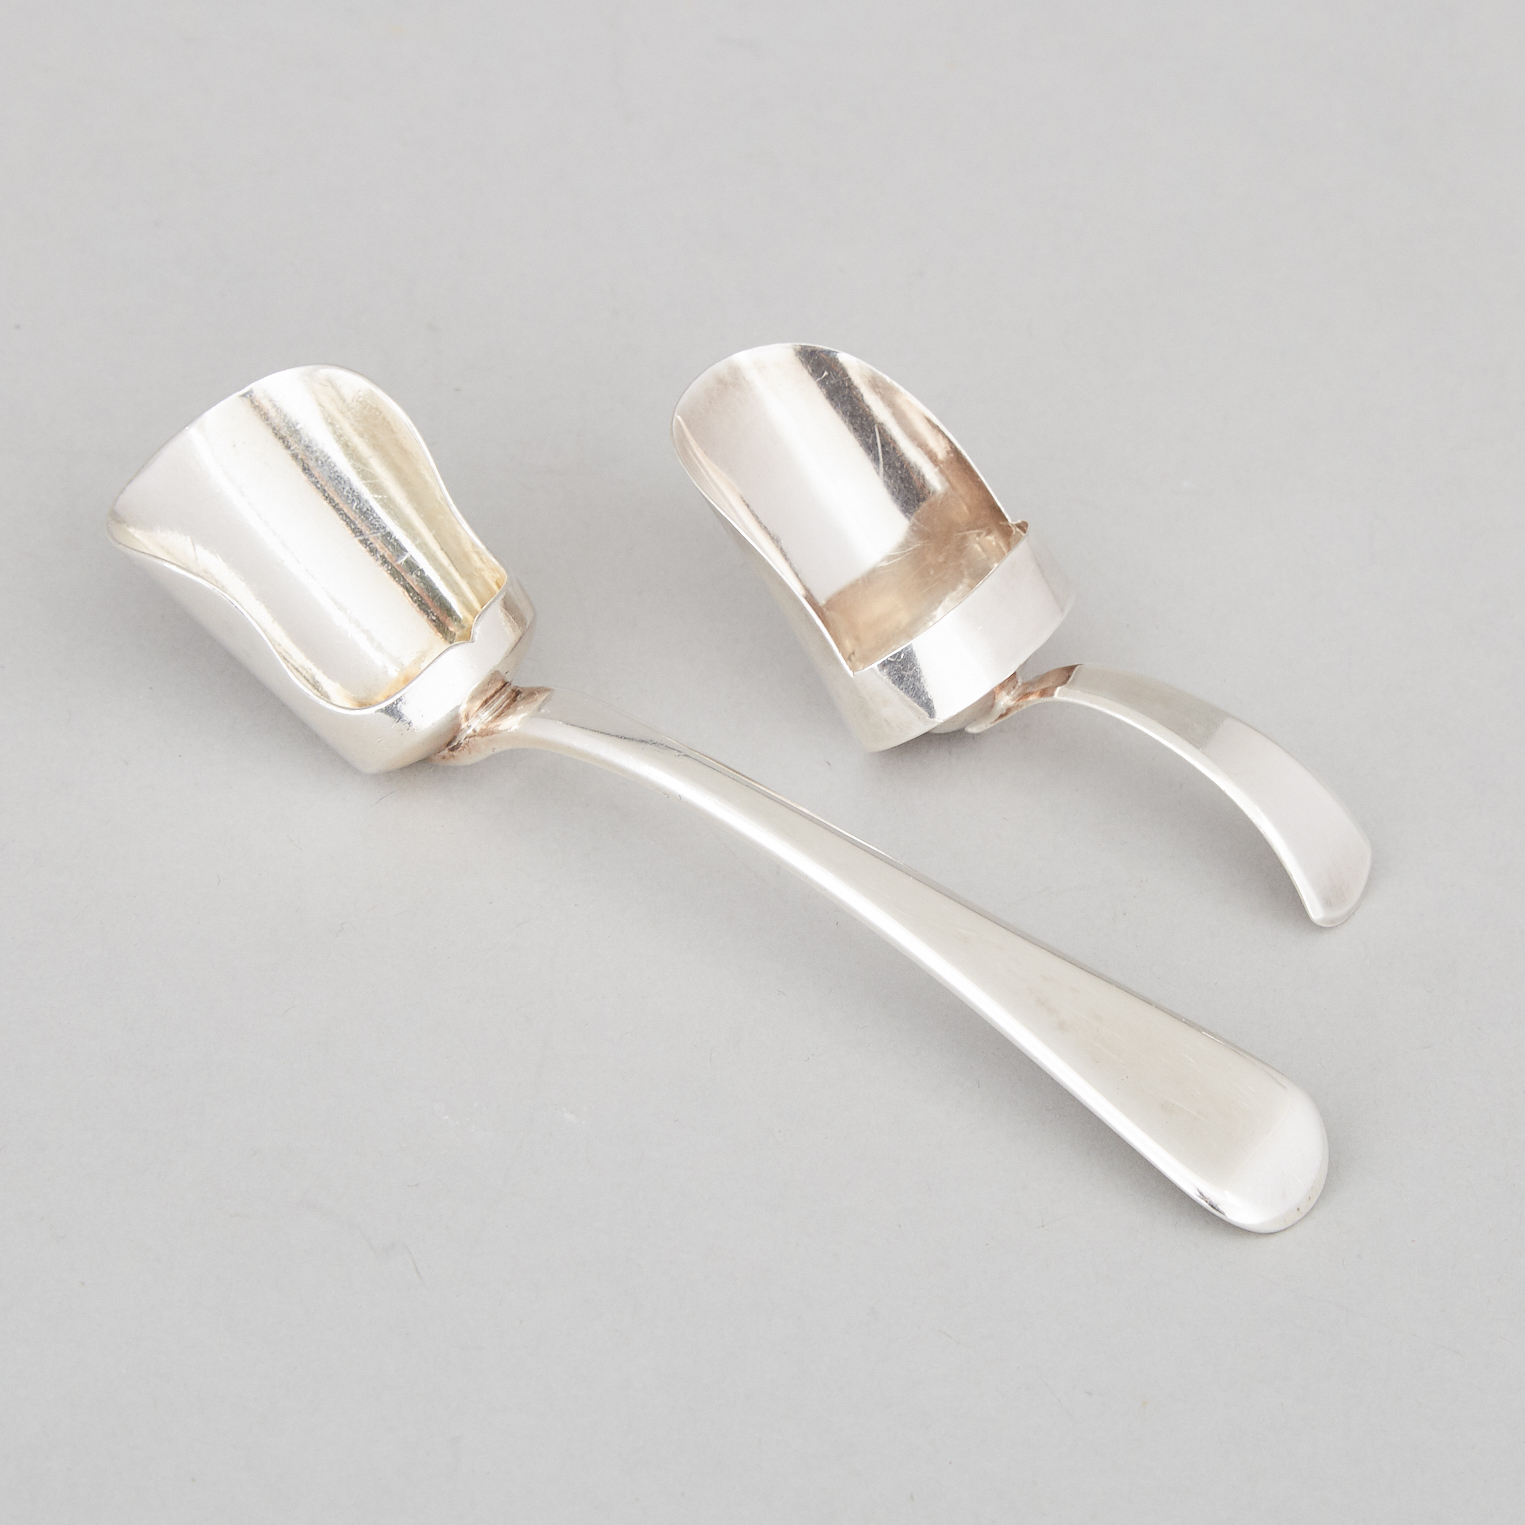 Two George III Silver Scoop Shaped Caddy Spoons, Josiah Snatt and William Eley & William Fearn, London, 1807/15